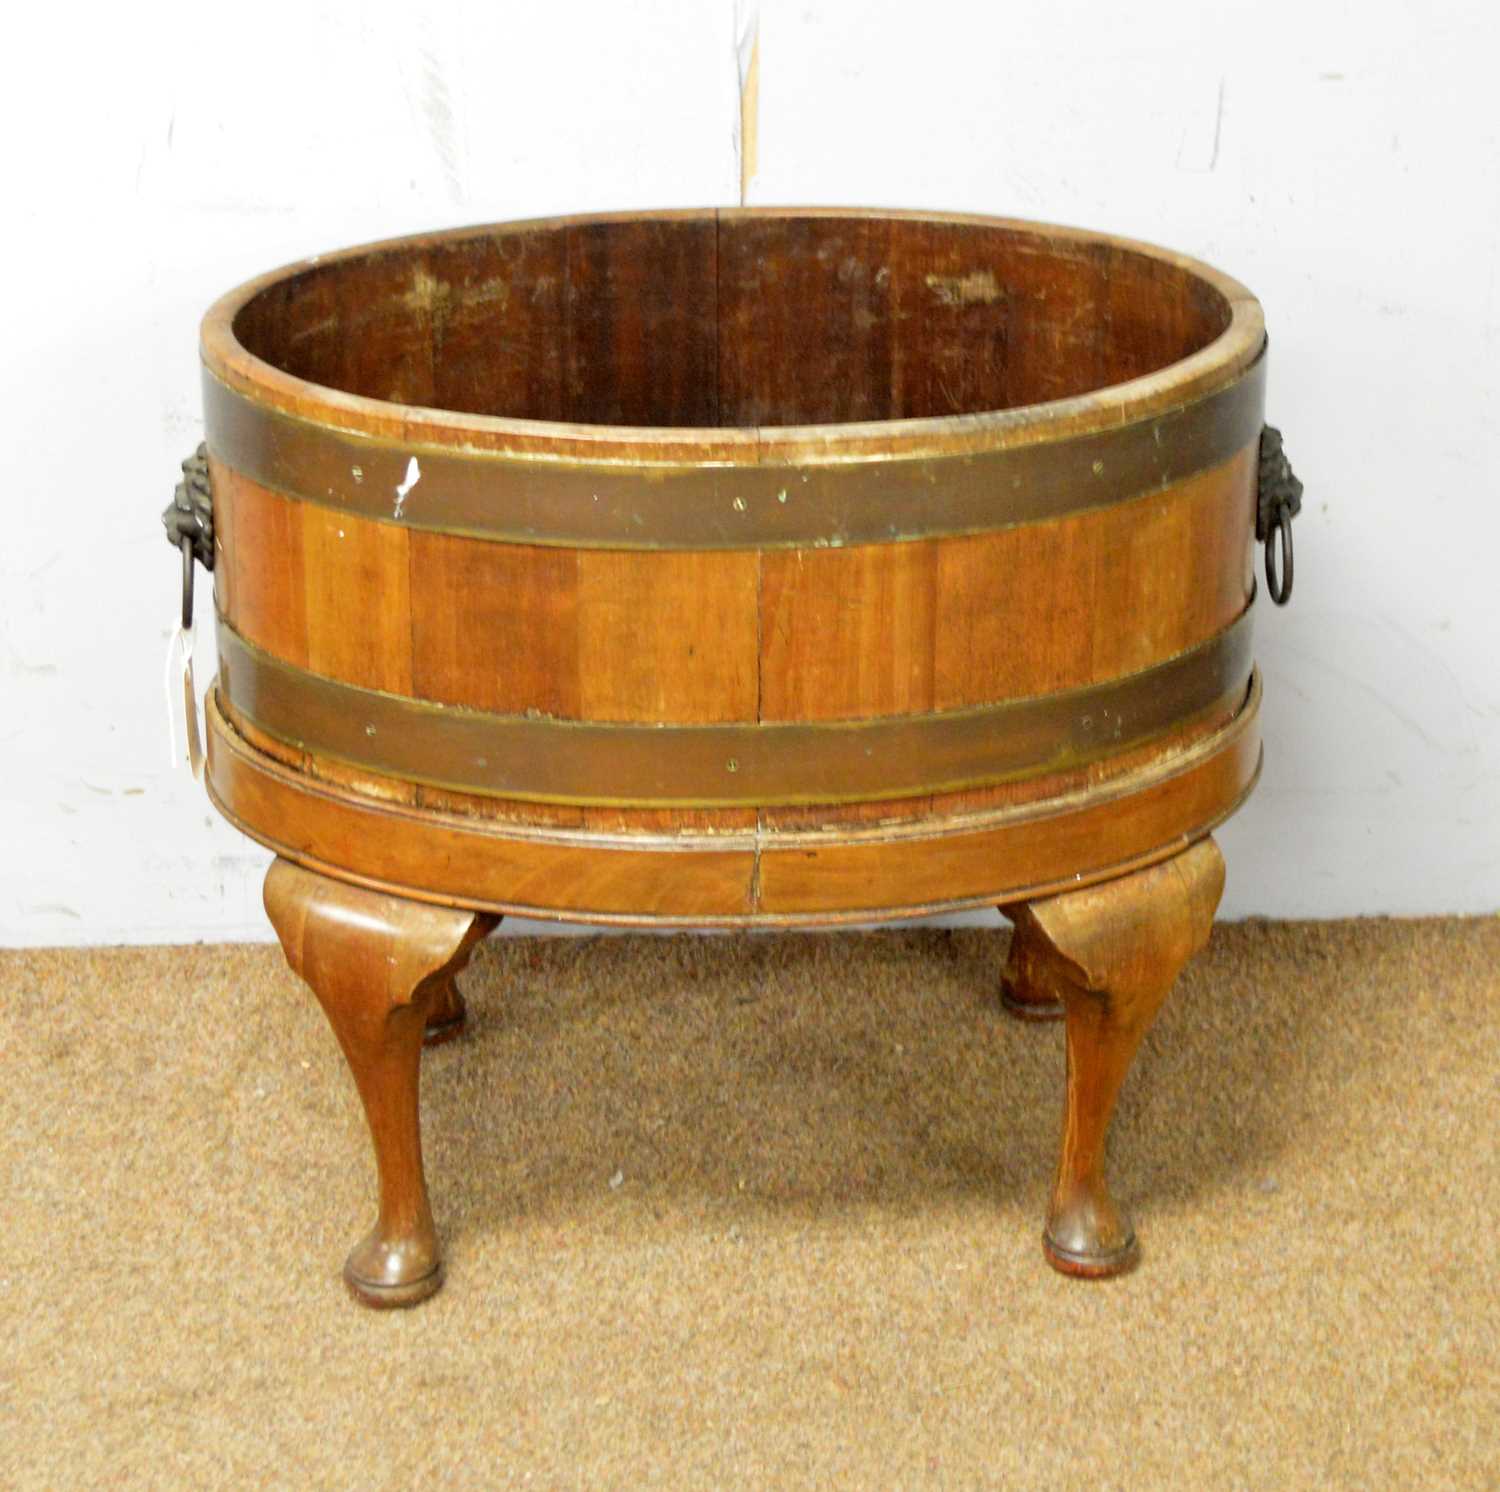 Lot 28 - A two handled jardiniere converted from a Georgian wine cooler